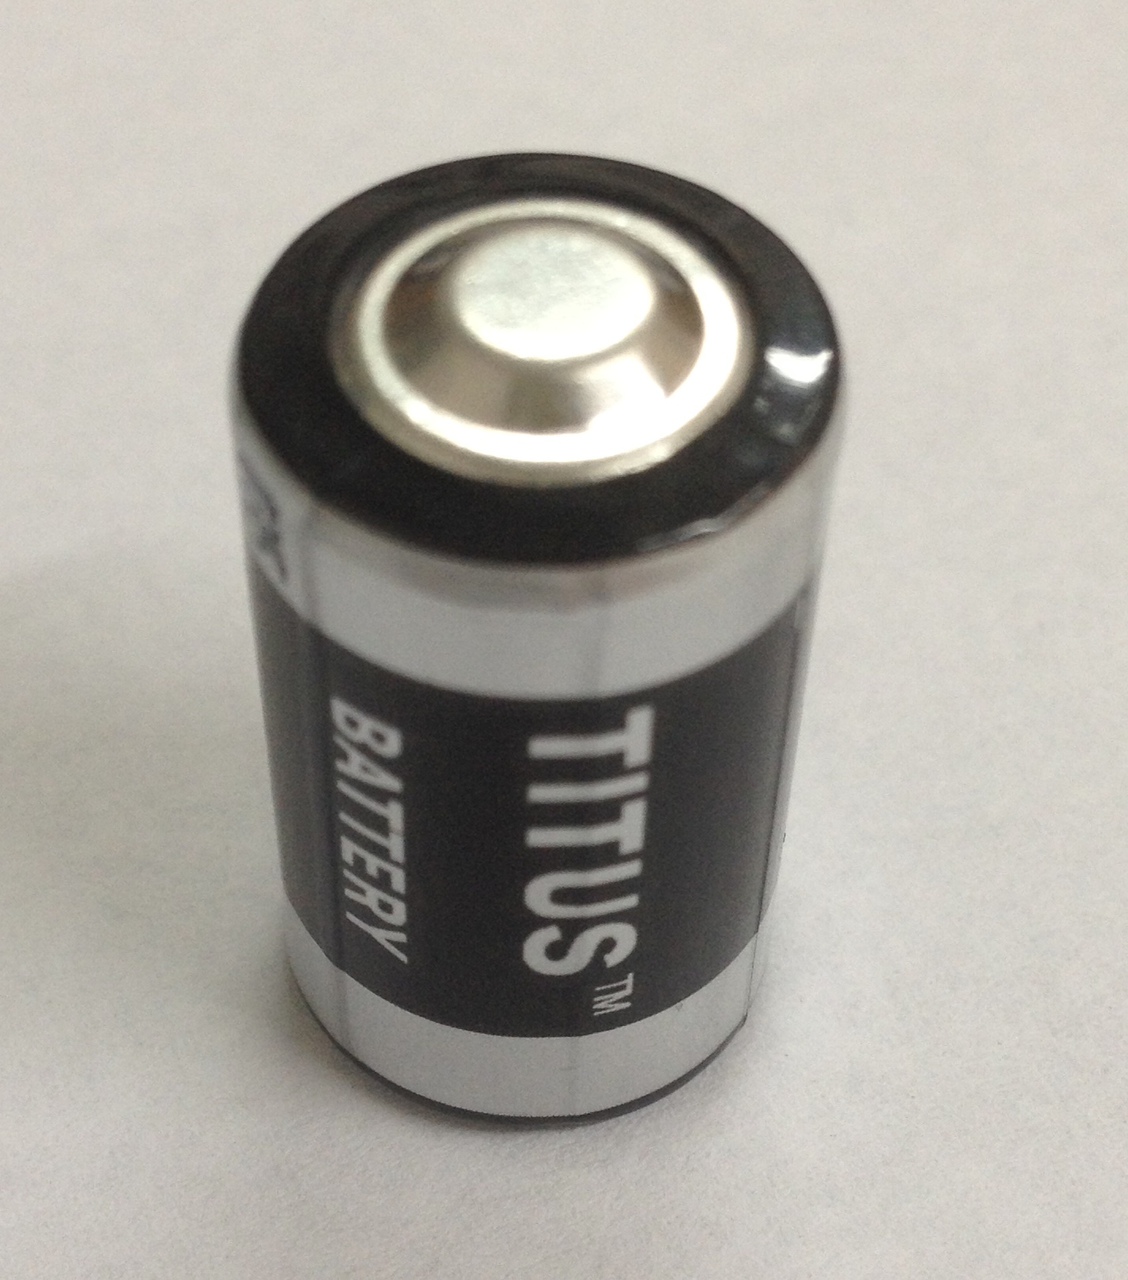 Titus 1/2 AA Size 3.6V ER14250T Lithium Battery With Solder Tabs - 4 Pack + Free Shipping!